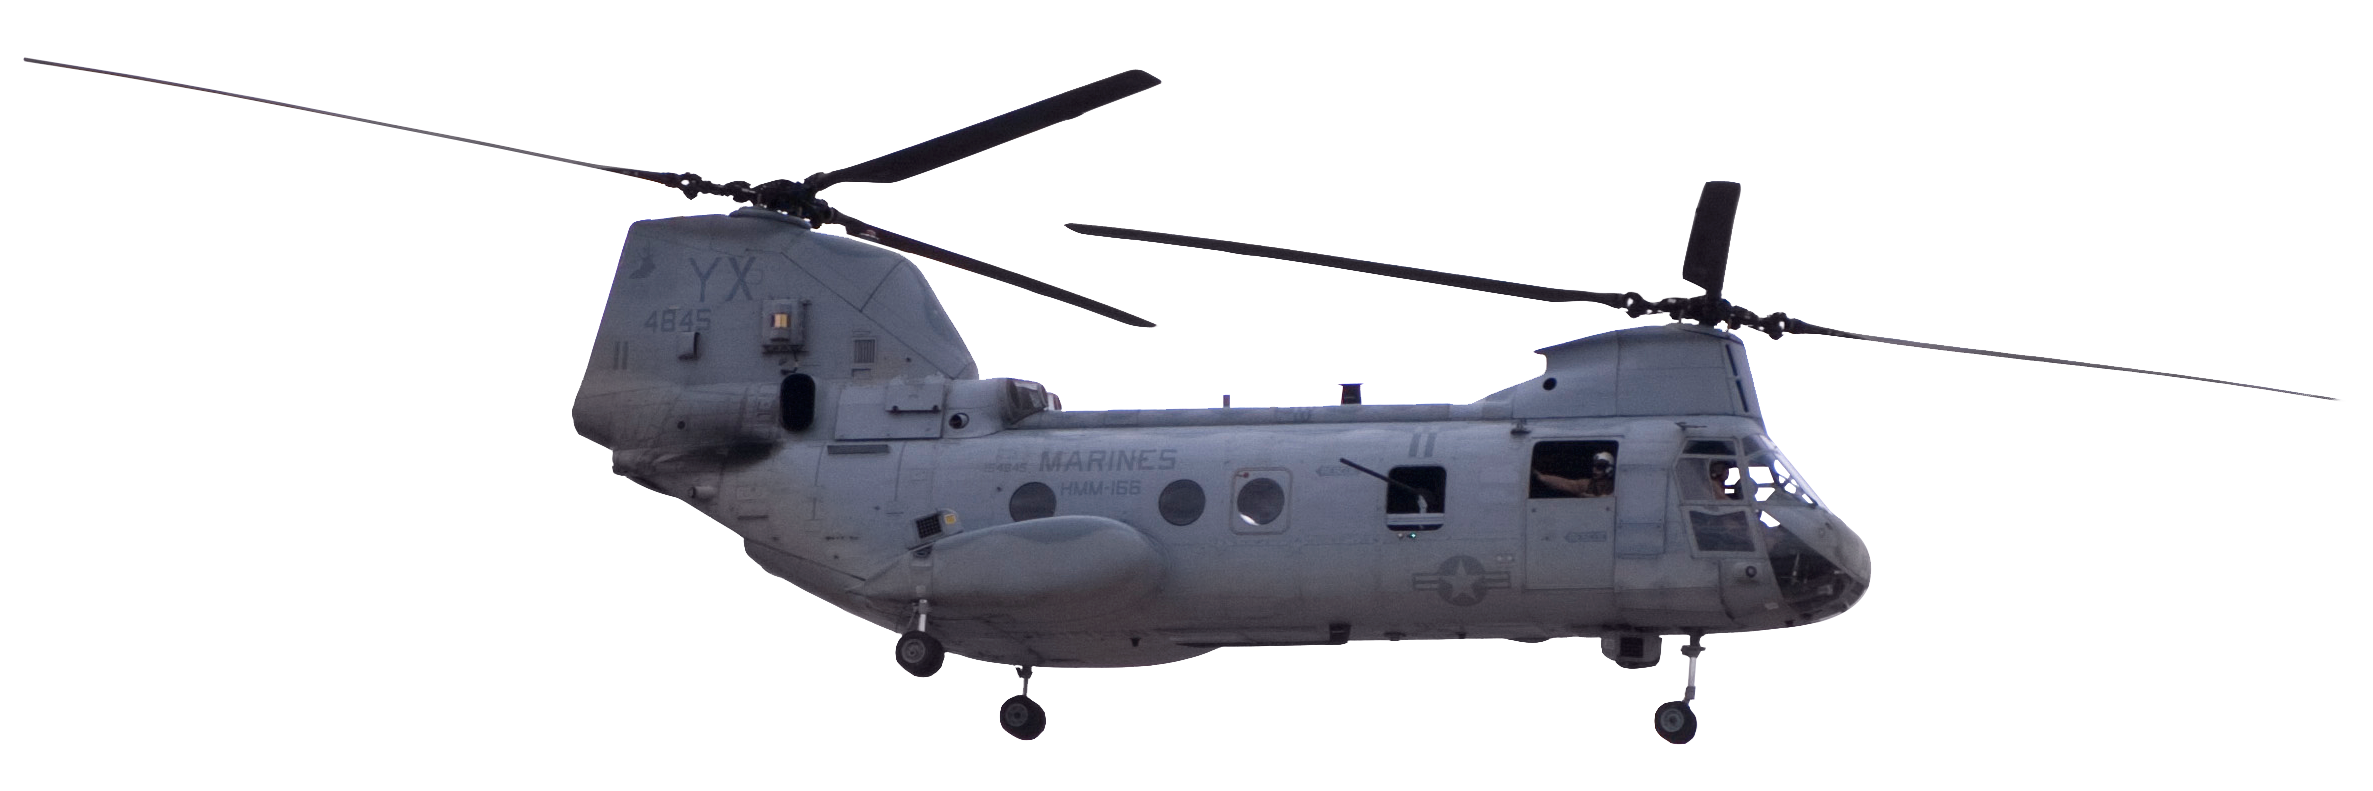 Helicopter PNG - 8324